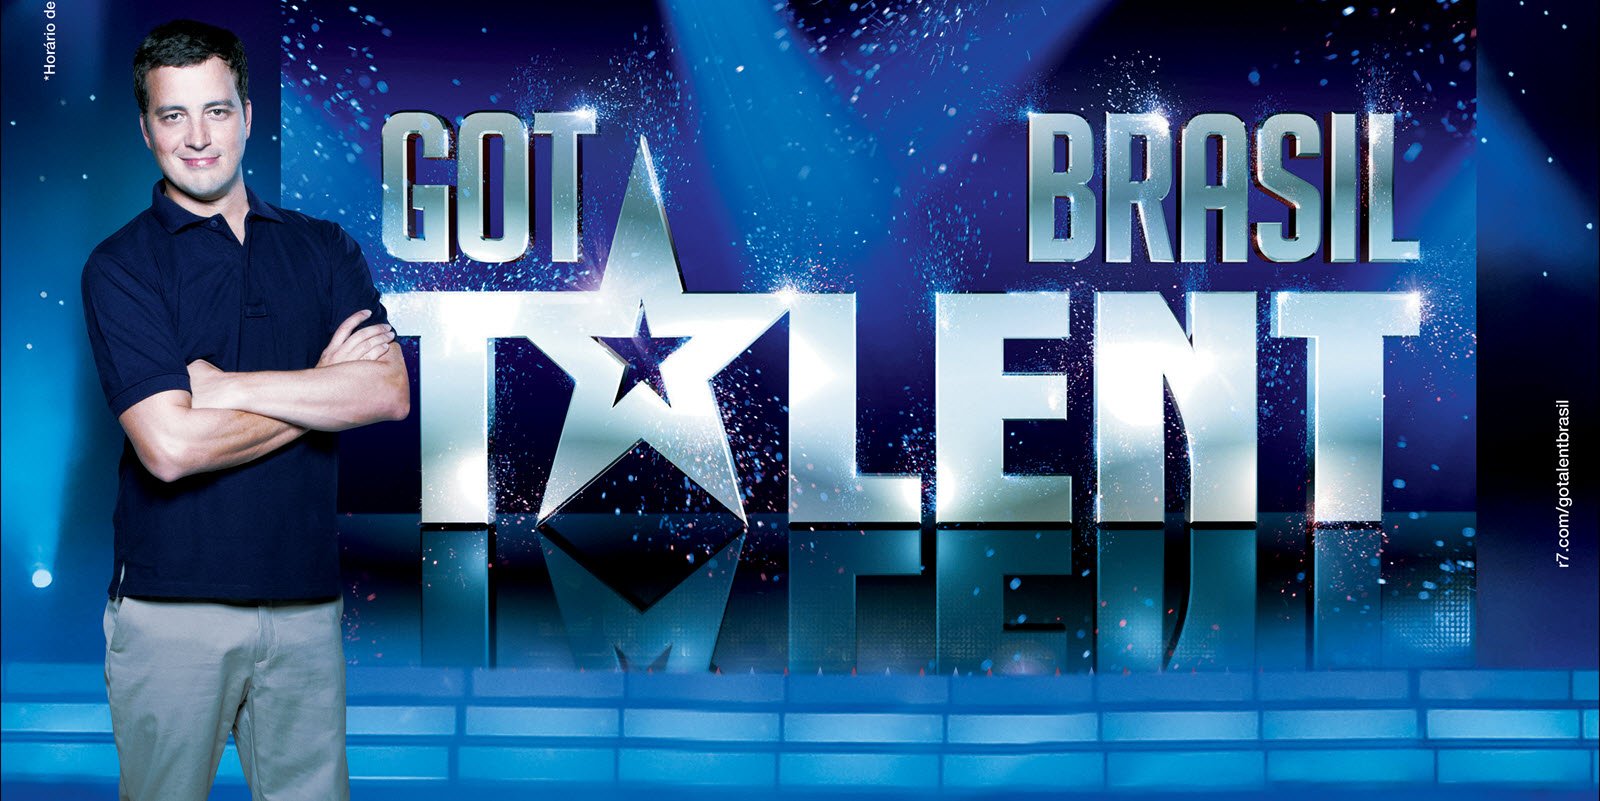 Featured image for “Got Talent Brasil”